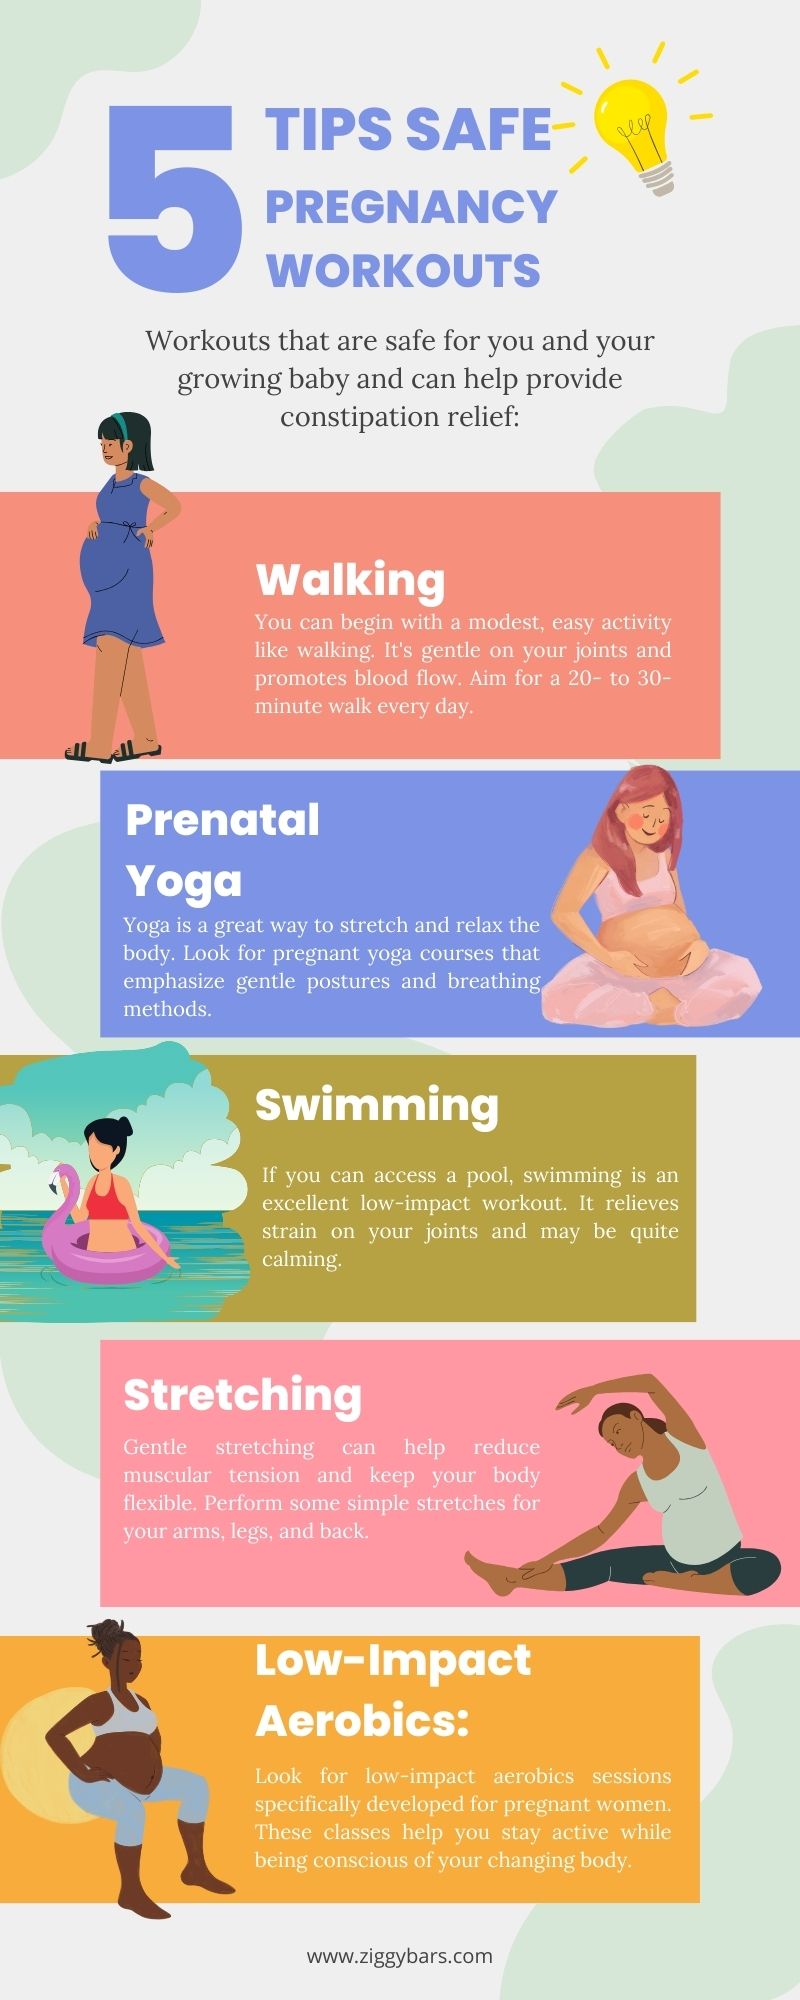 Pregnancy Workouts for Constipation Relief